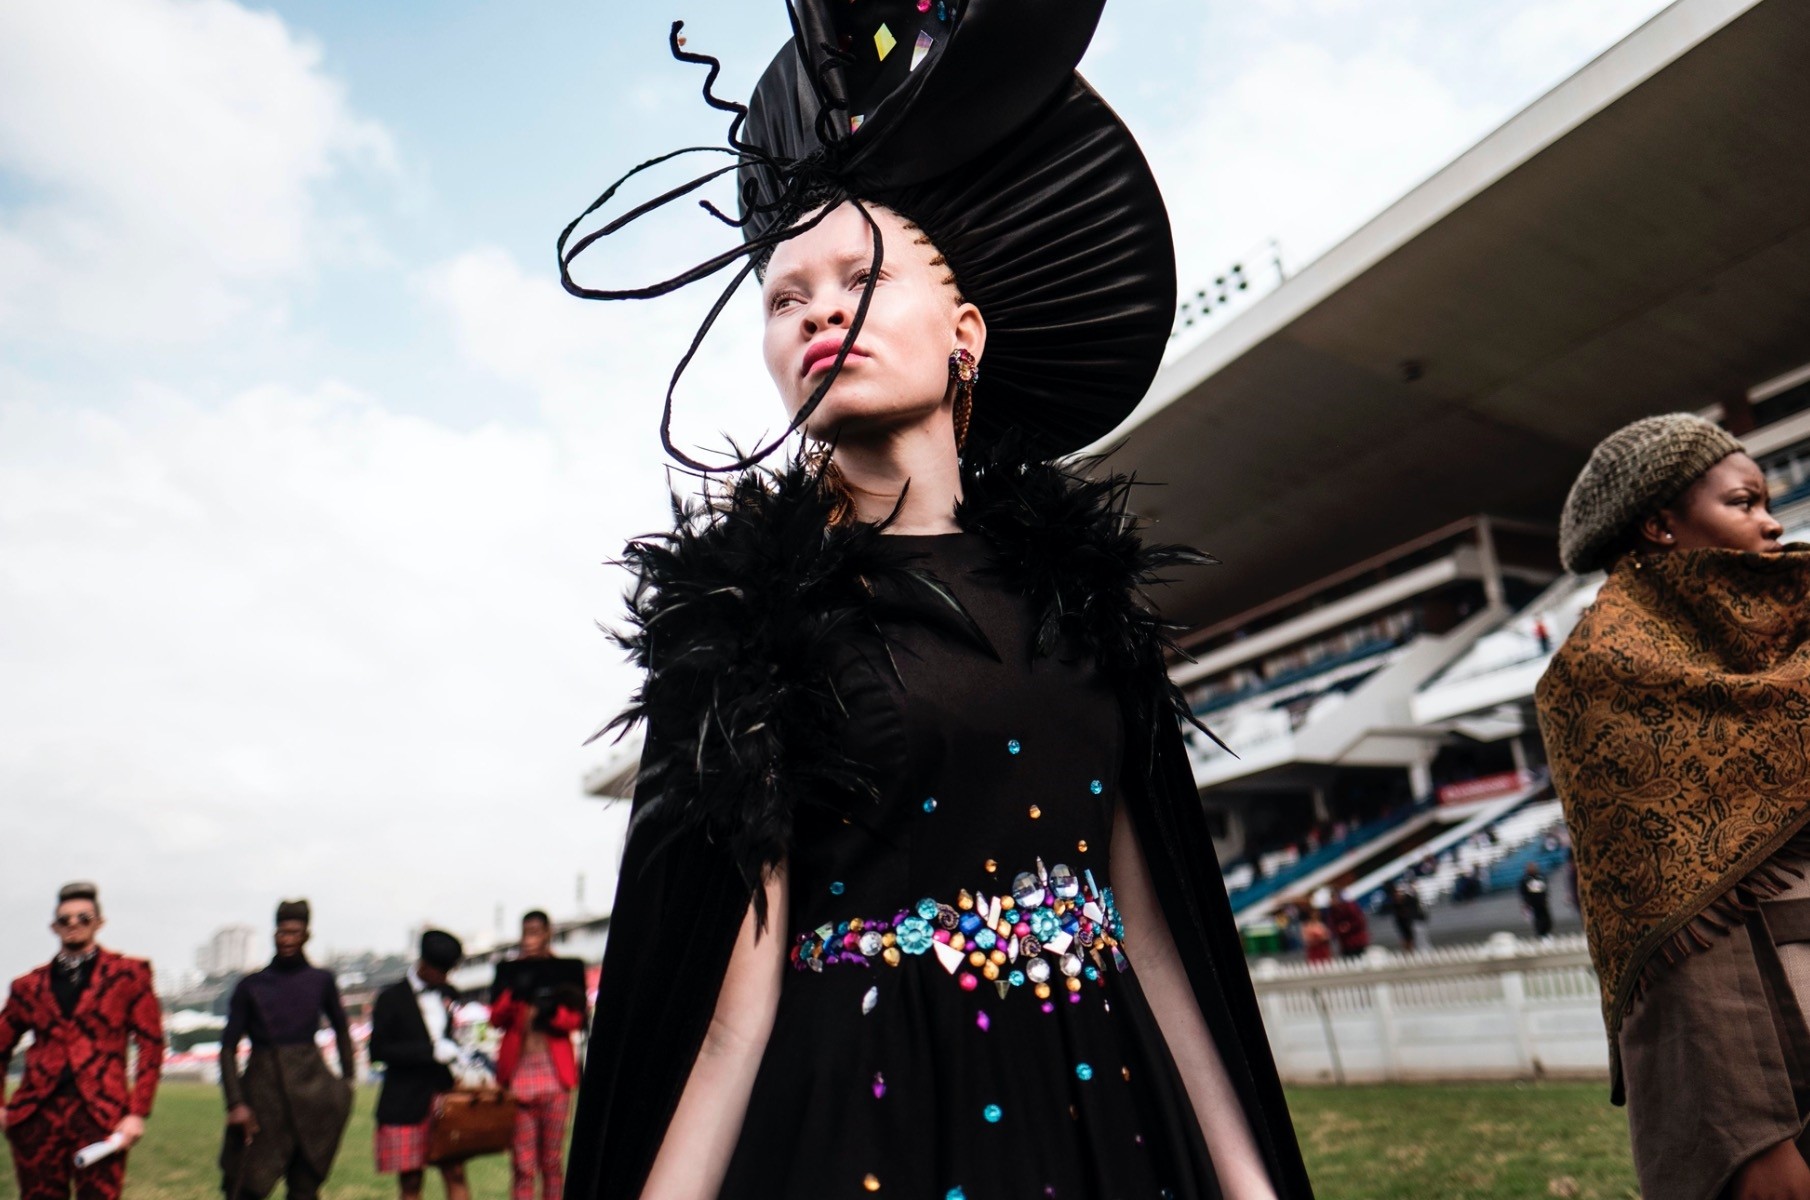 An Albino model presents a creation by a local designer during a fashion show at the 2017 Durban July horse race.